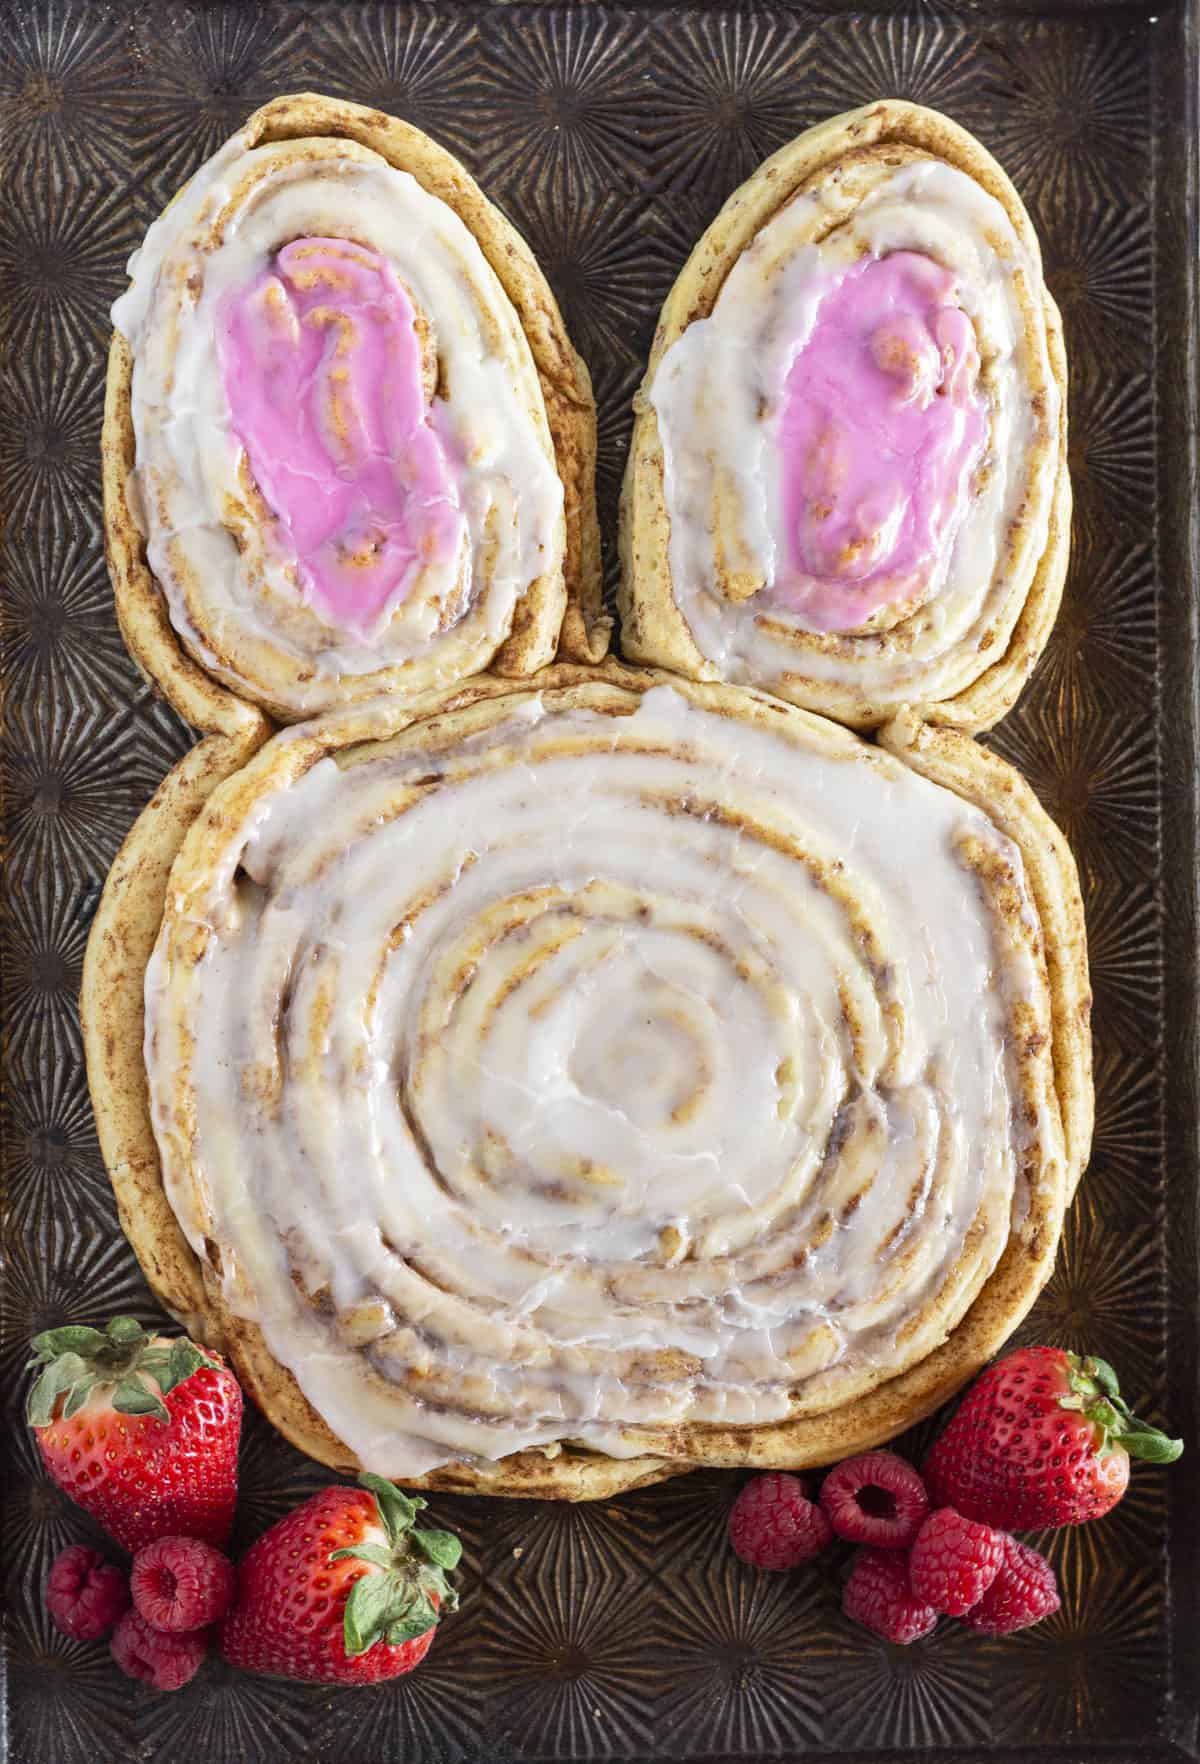 A large cinnamon roll bunny made with refrigerated cinnamon rolls.